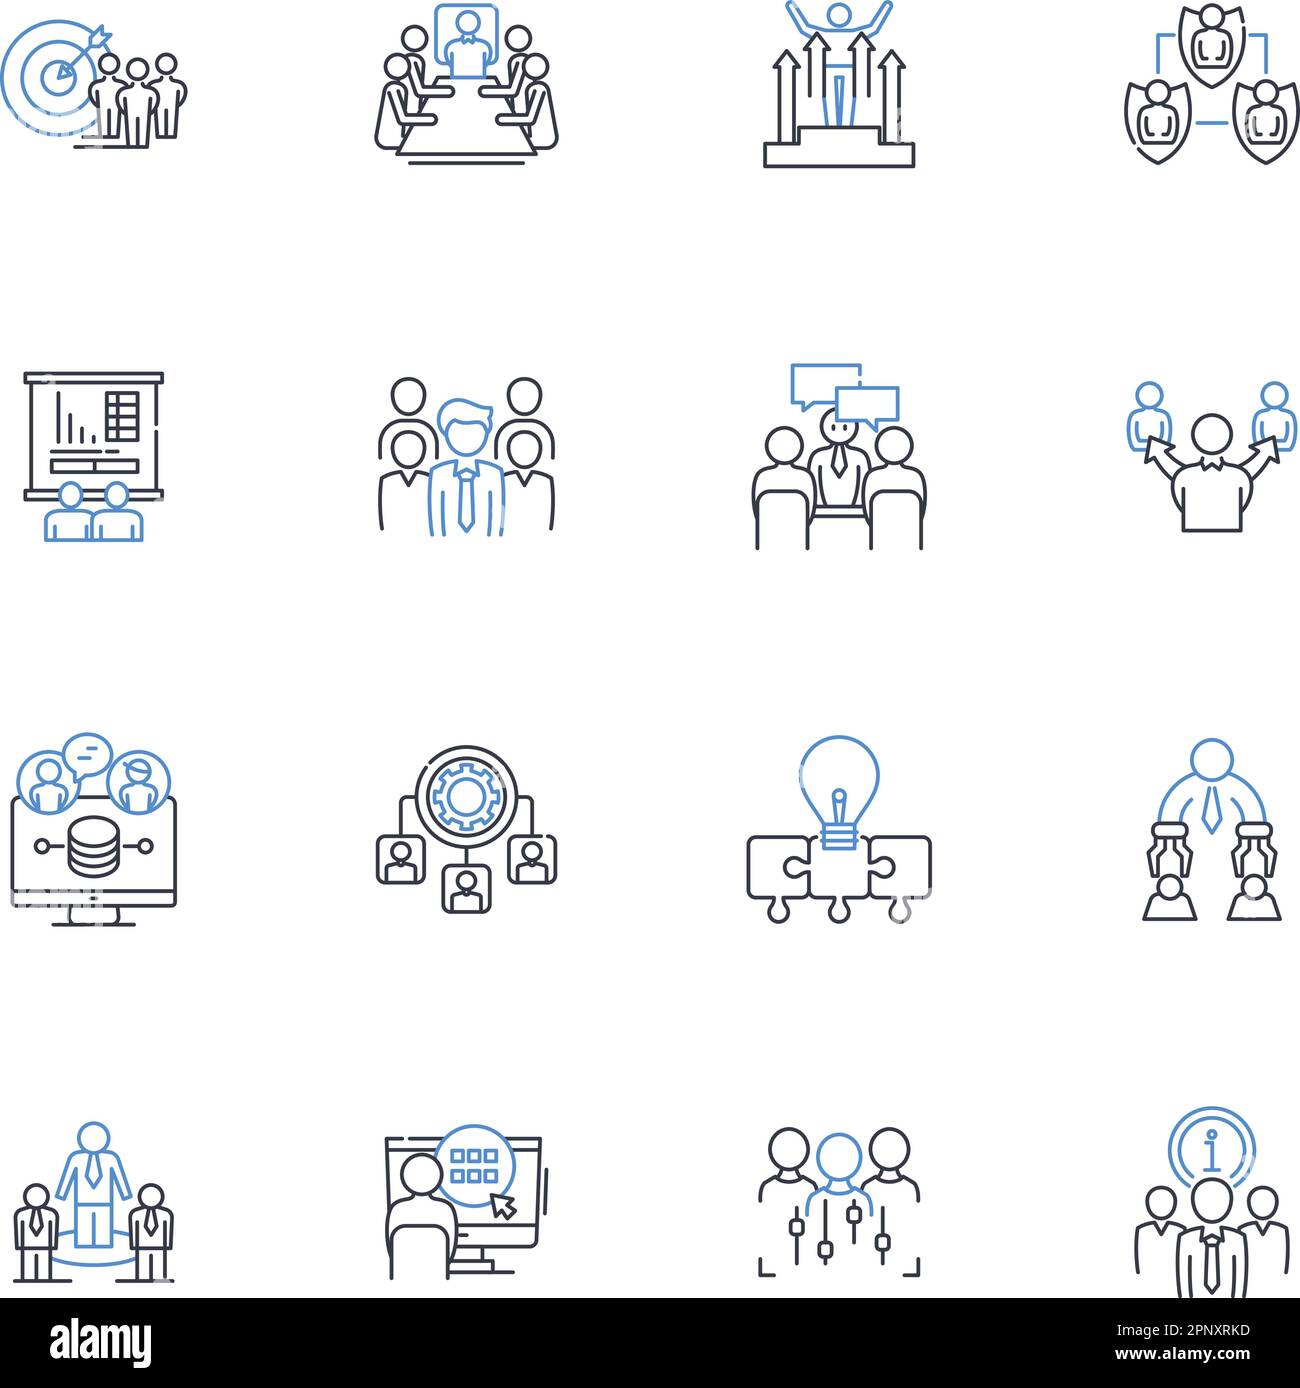 Roundtable line icons collection. Dialogue, Discussion, Debate, Collaboration, Panel, Brainstorming, Forum vector and linear illustration. Exchange Stock Vector